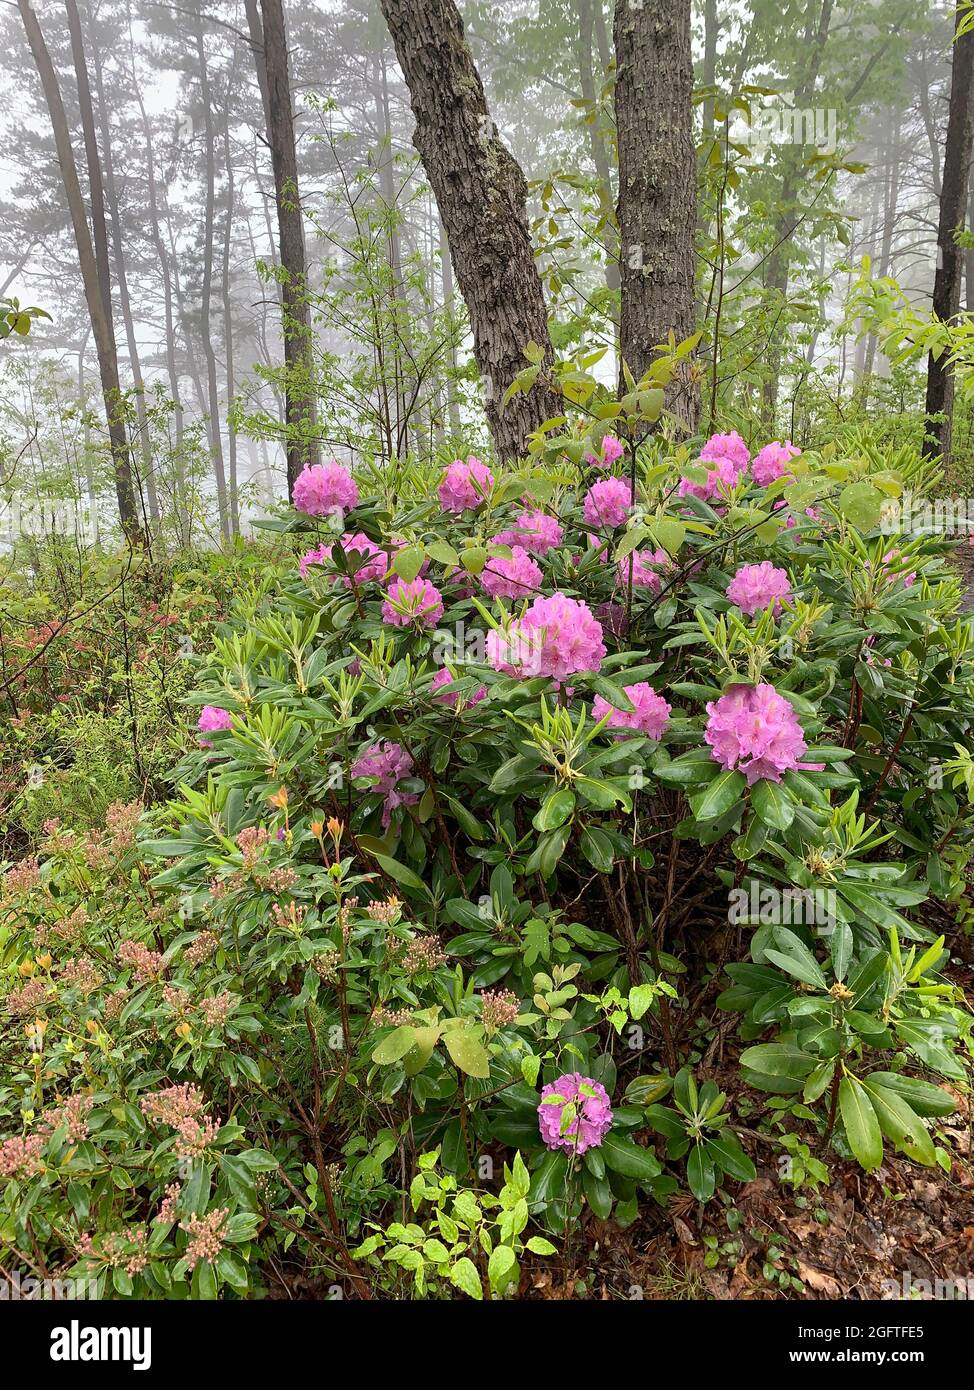 West Virginia, New River Gorge National Park. Rhododendron auf dem Endless Wall Trail. Stockfoto